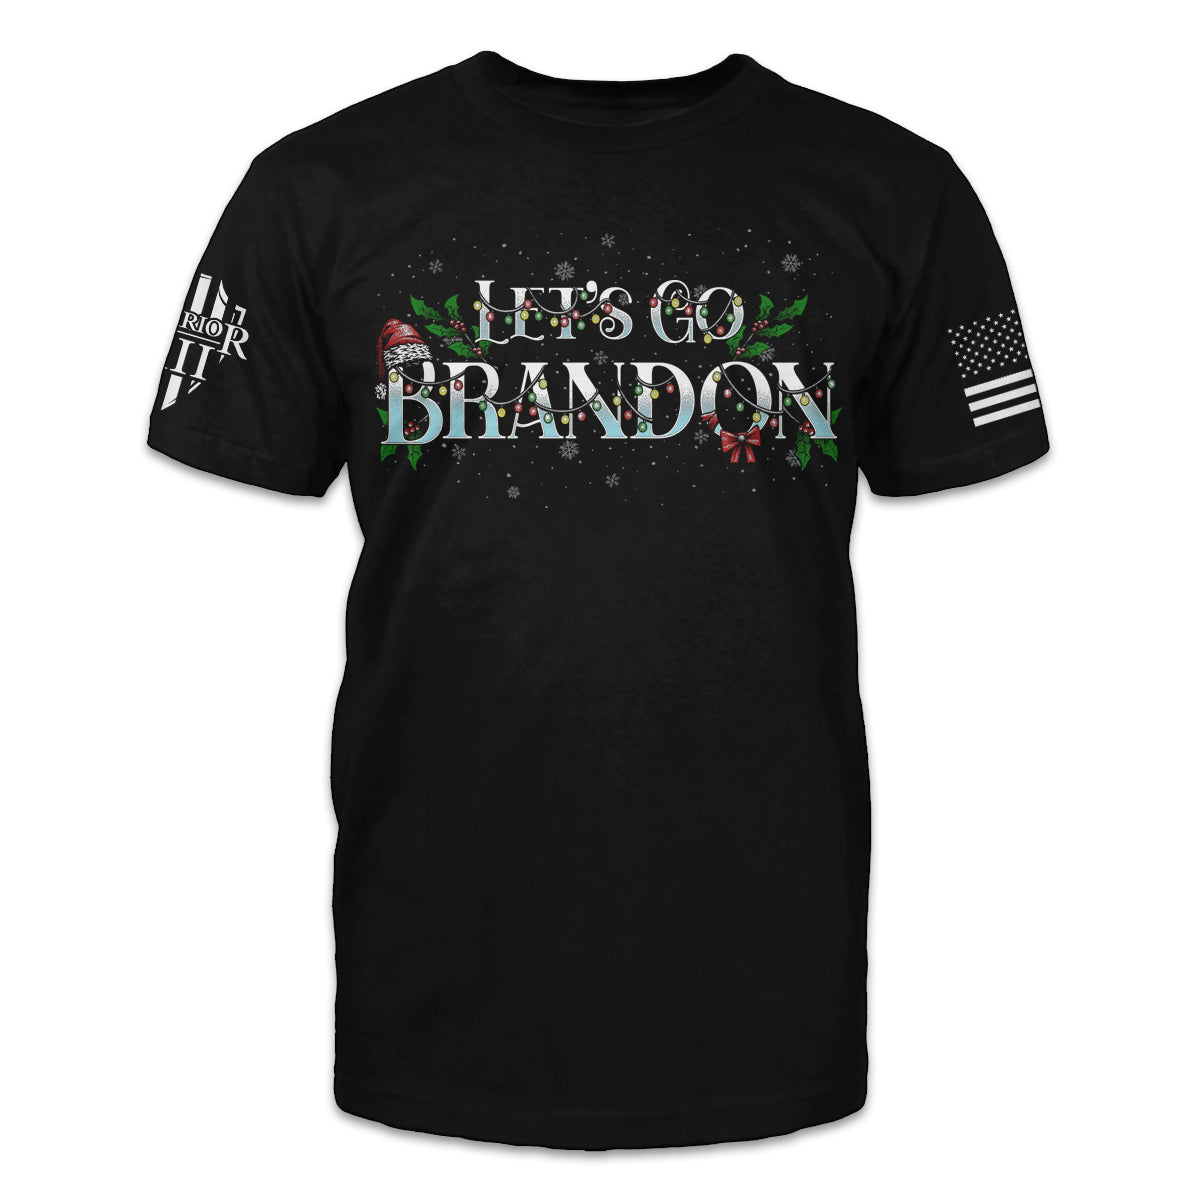 A black t-shirt with the words "Let's Go Brandon" with Christmas decorations printed on the front of the shirt.